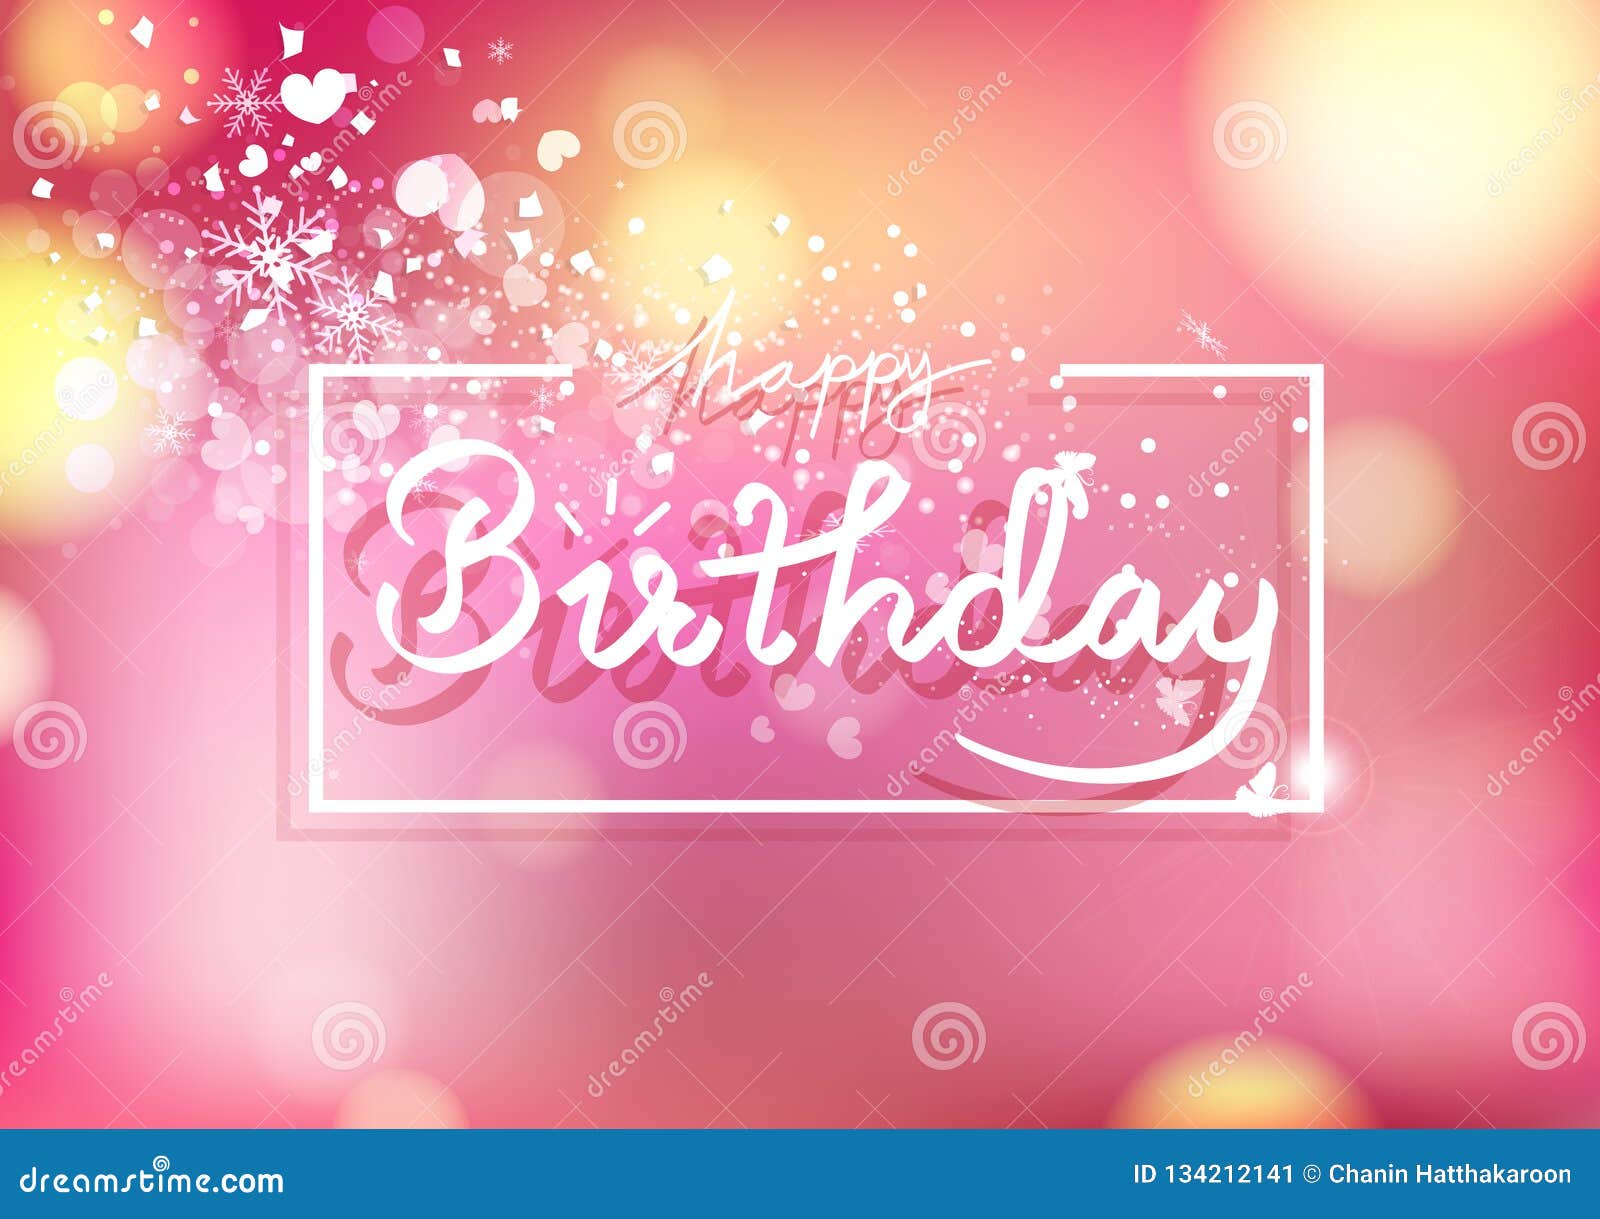 Happy Birthday Card, Calligraphy Ribbon Style, Scatter Heart and ...